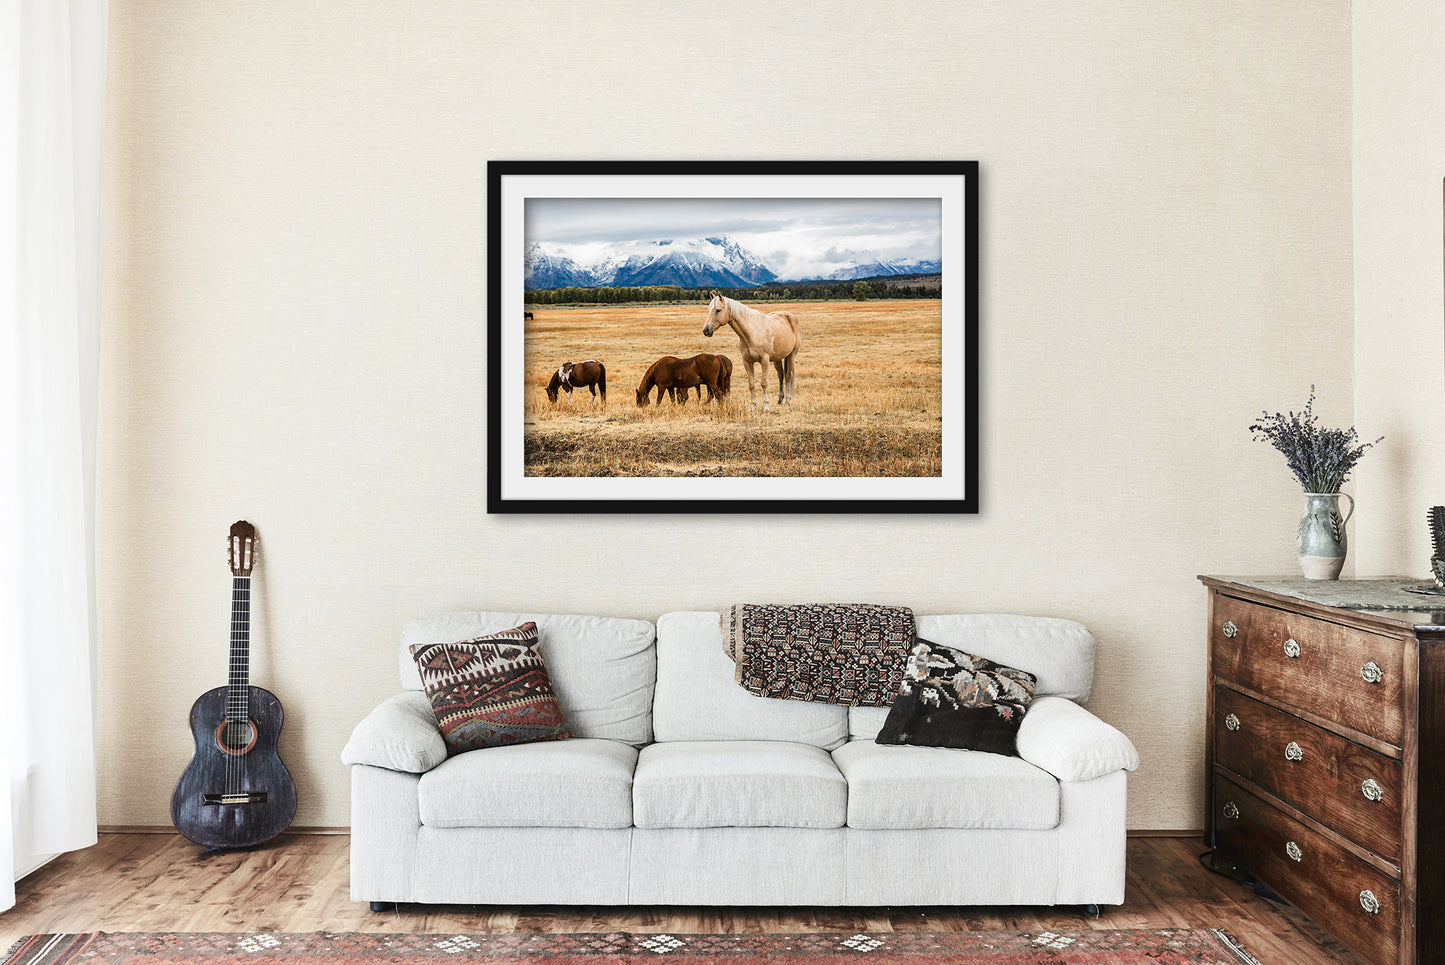 Palomino Horse Framed and Matted Print | Equine Photo | Grand Teton Decor | Wyoming Photography | Western Wall Art | Ready to Hang